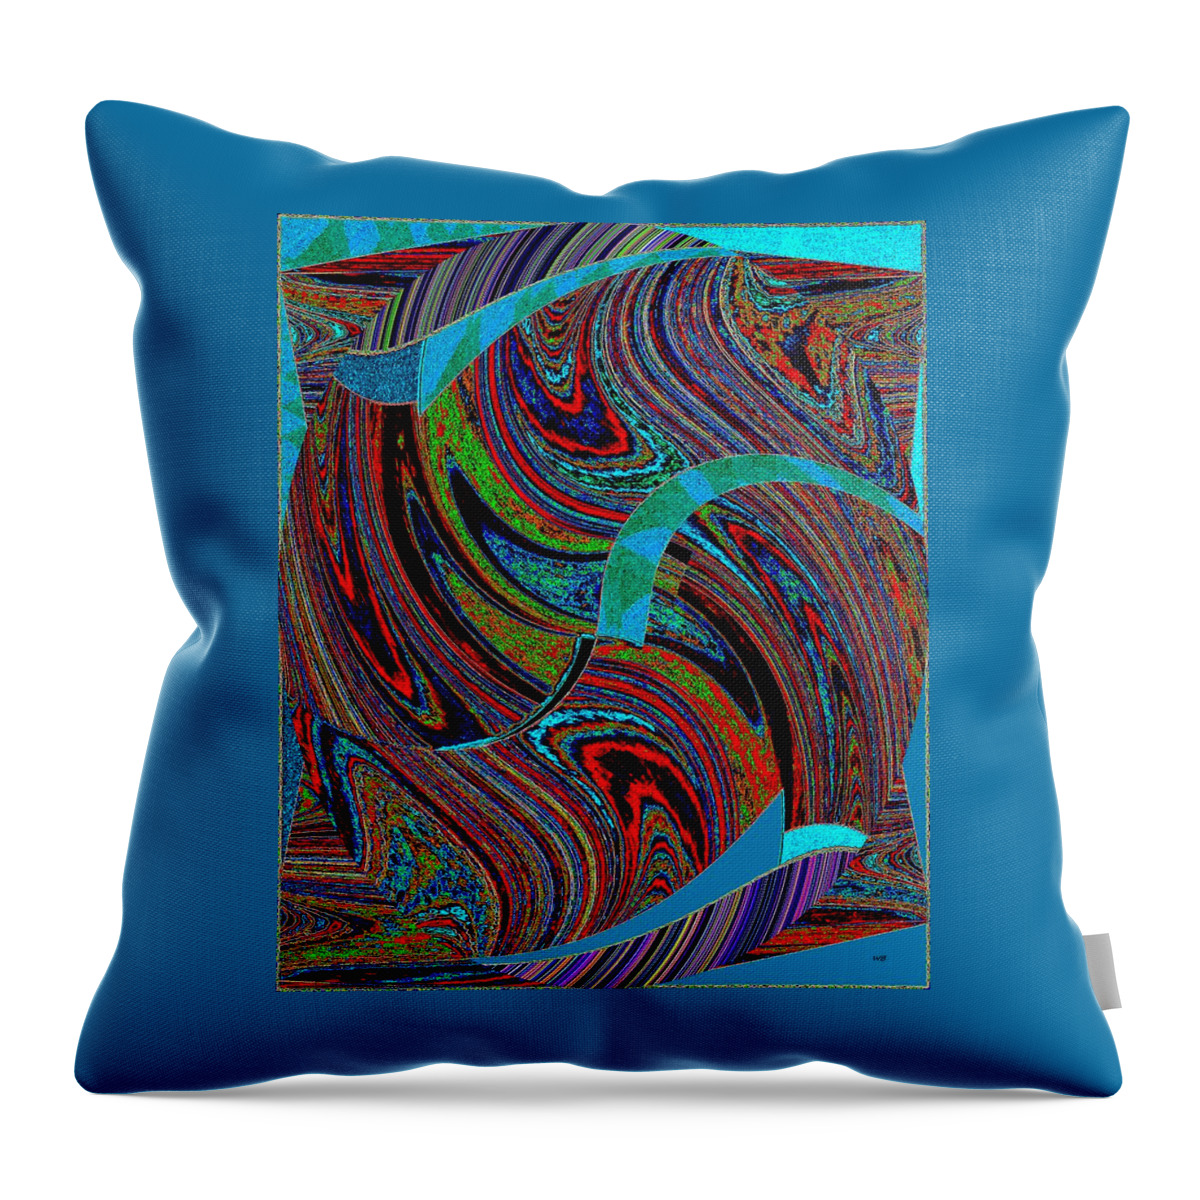 Hoopla Throw Pillow featuring the digital art Abstract Hoopla by Will Borden